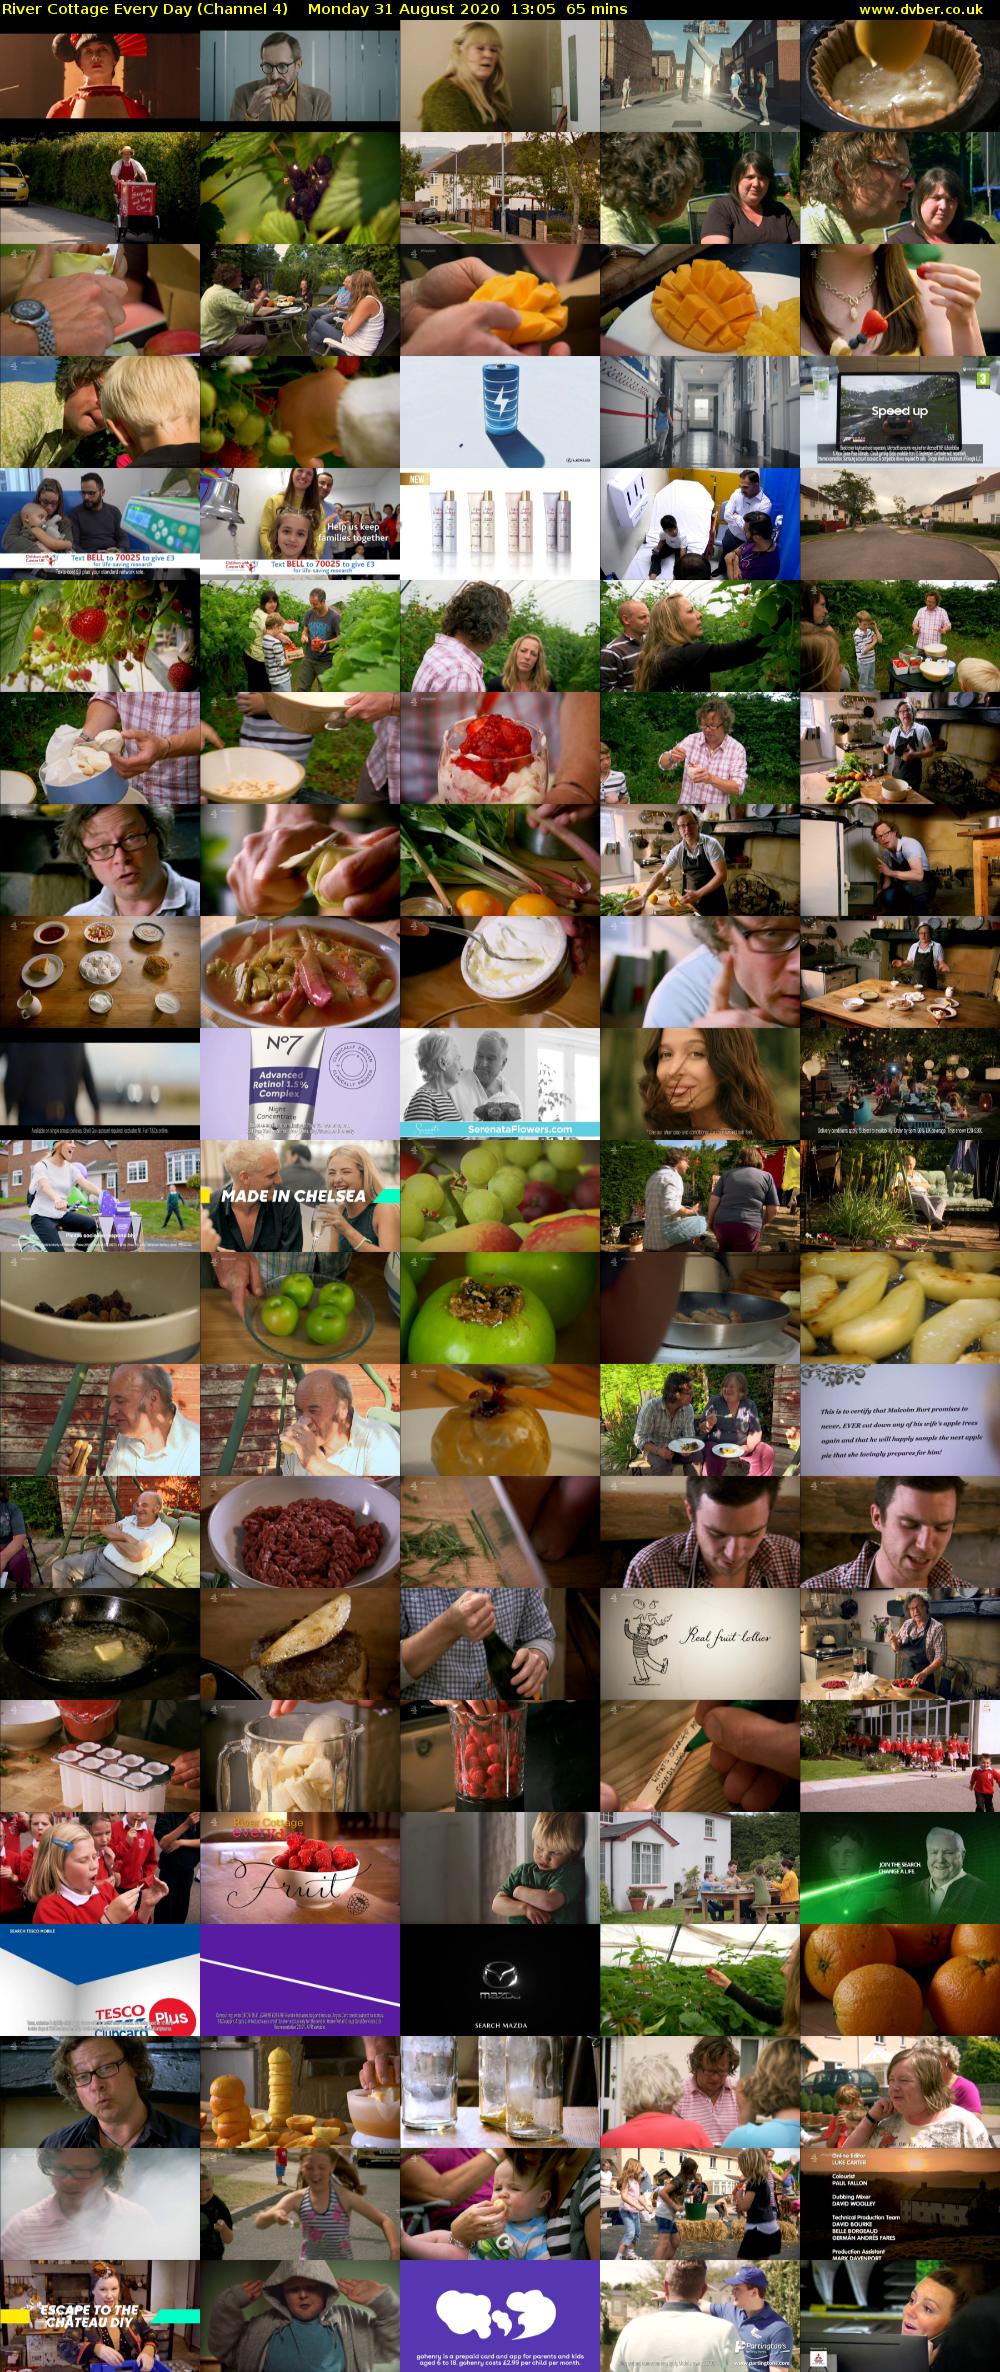 River Cottage Every Day (Channel 4) Monday 31 August 2020 13:05 - 14:10